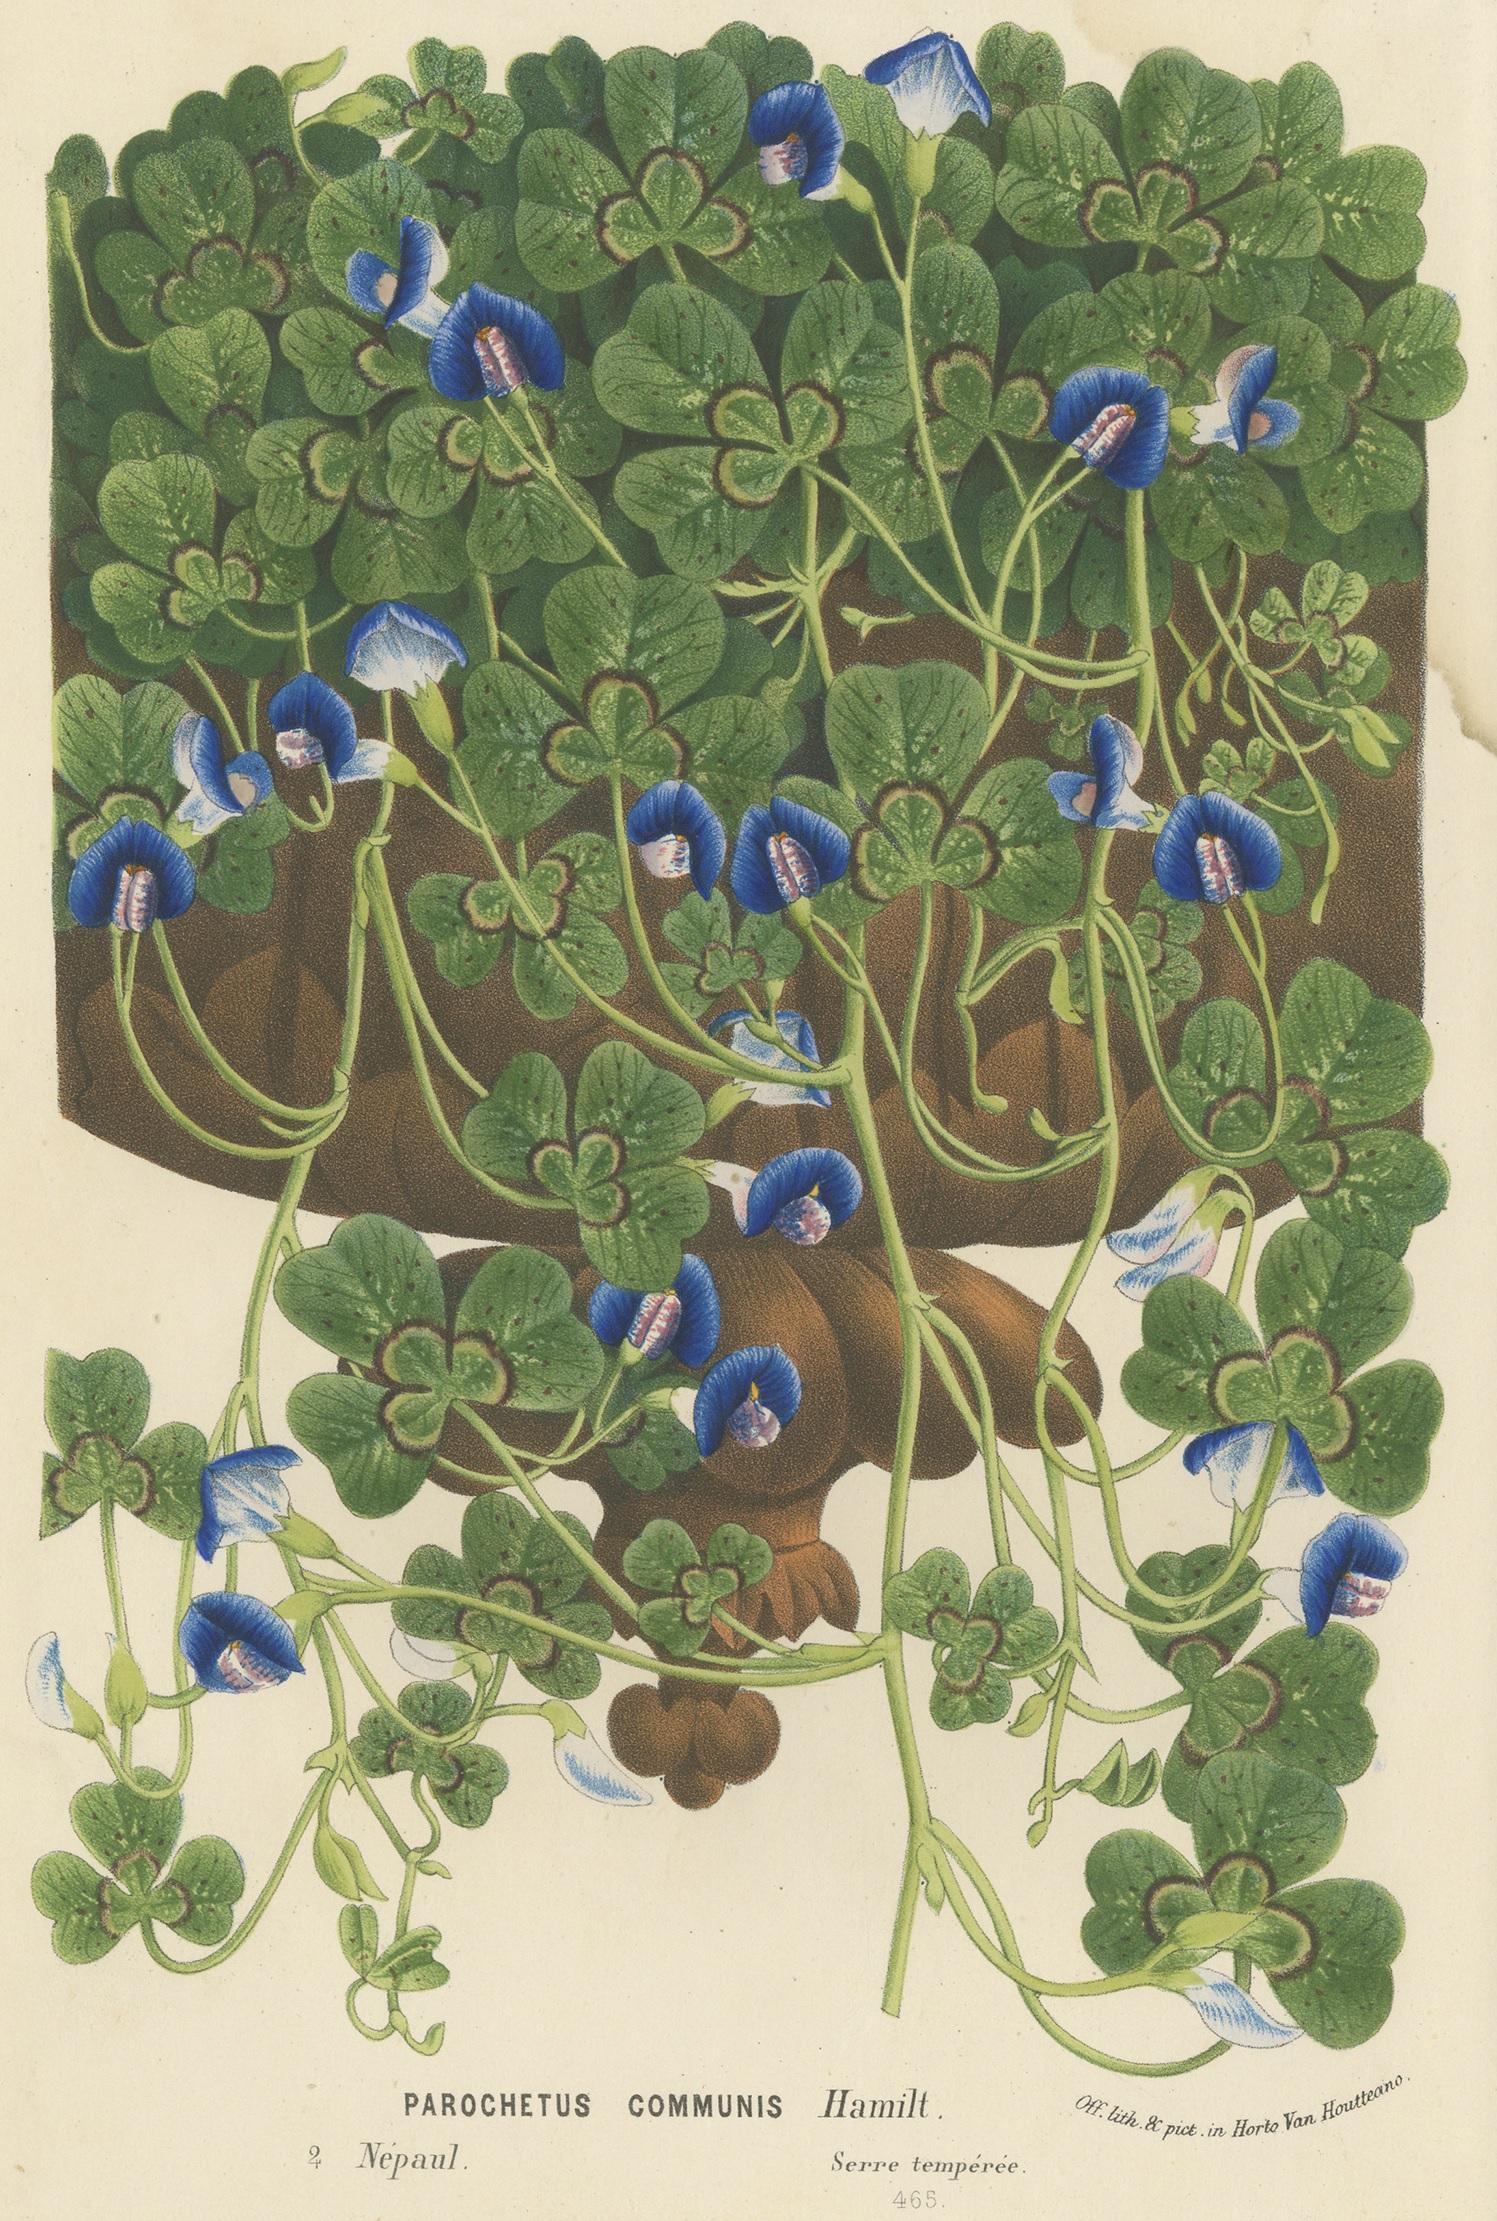 Antique print titled 'Parochetus Communis'. Lithograph of the parochetus communis, known in English as shamrock pea or blue oxalis. This print originates from volume 15 of 'Flore des Serres' by Louis van Houtte. Published between 1862 and 1865.